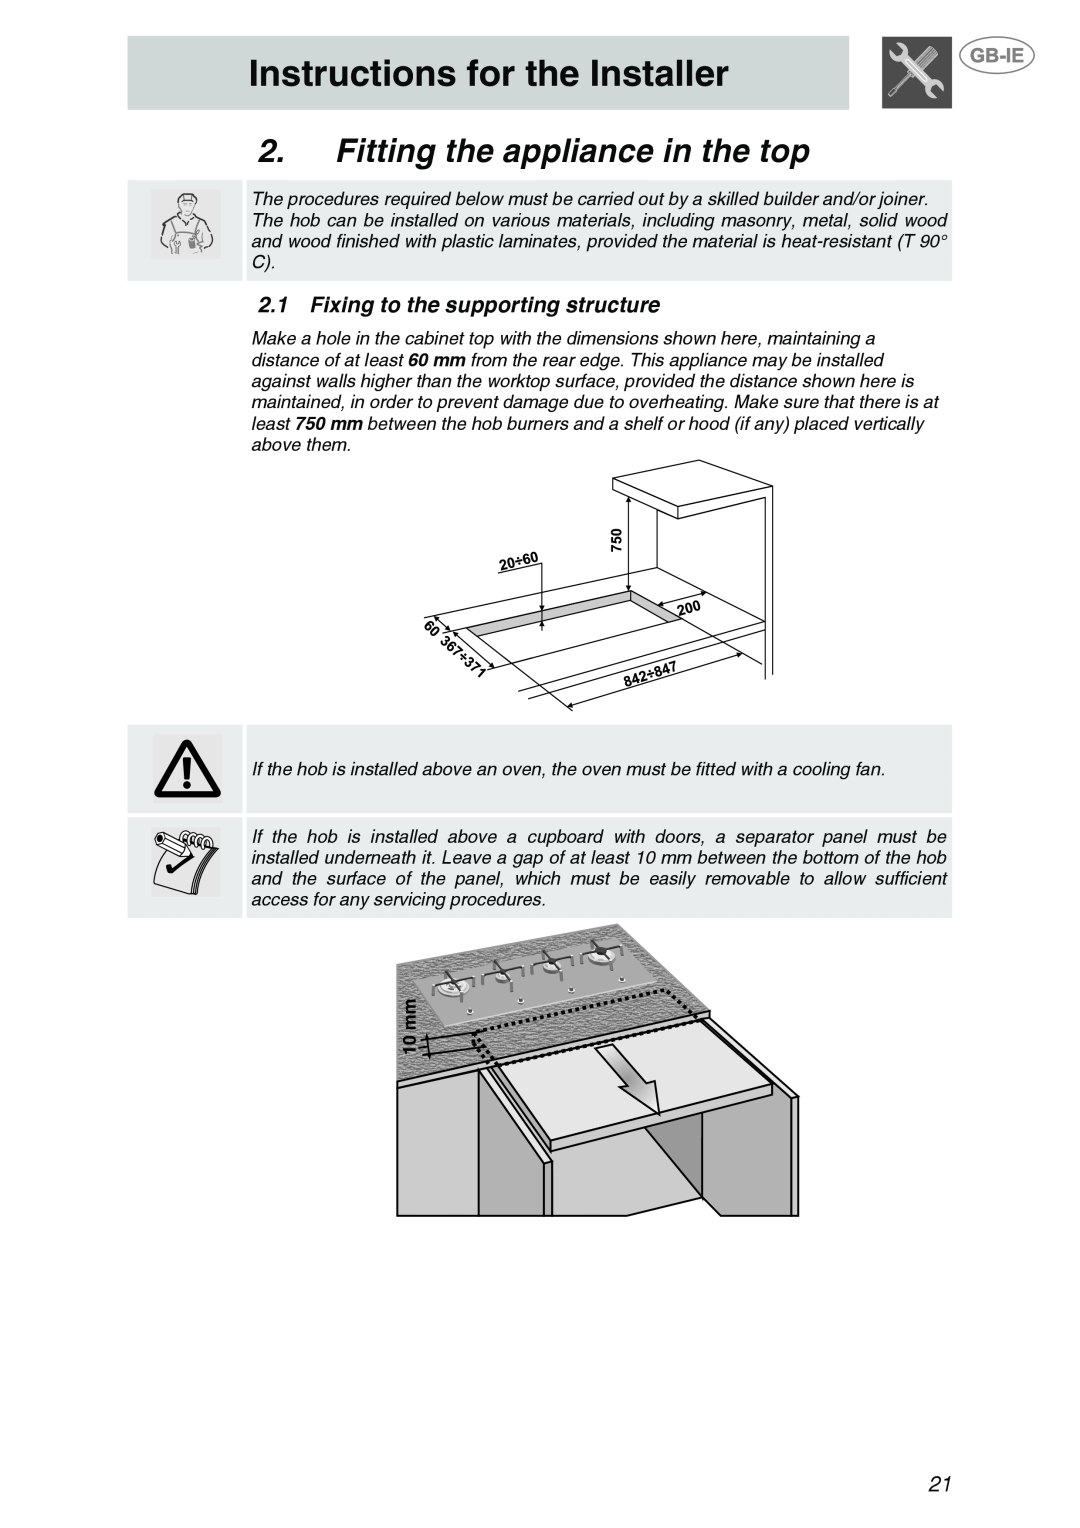 Smeg PX140NL manual Instructions for the Installer, Fitting the appliance in the top, Fixing to the supporting structure 